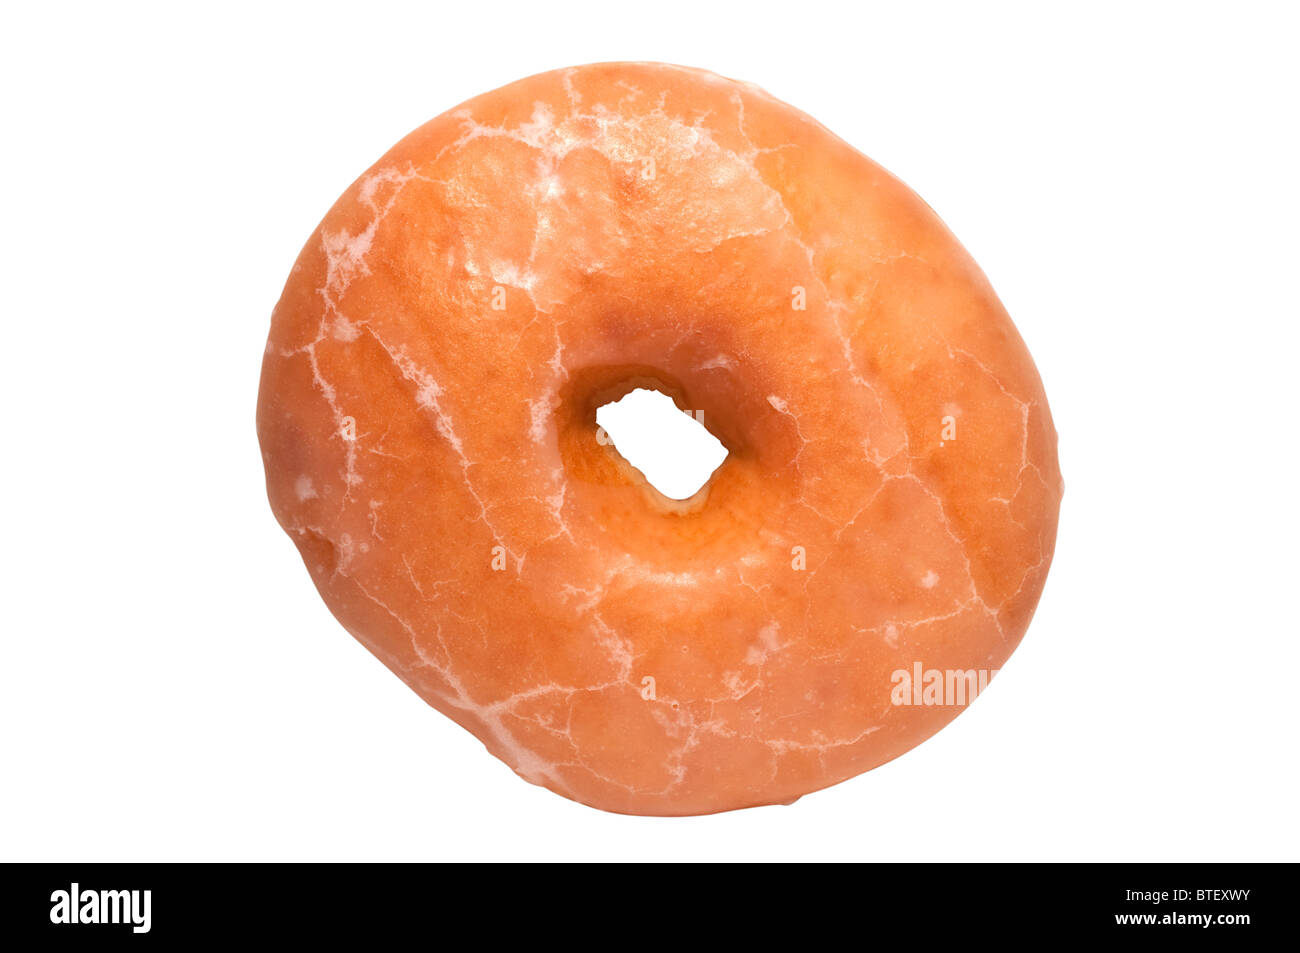 Glazed donut isolated on white background with clipping path. Stock Photo